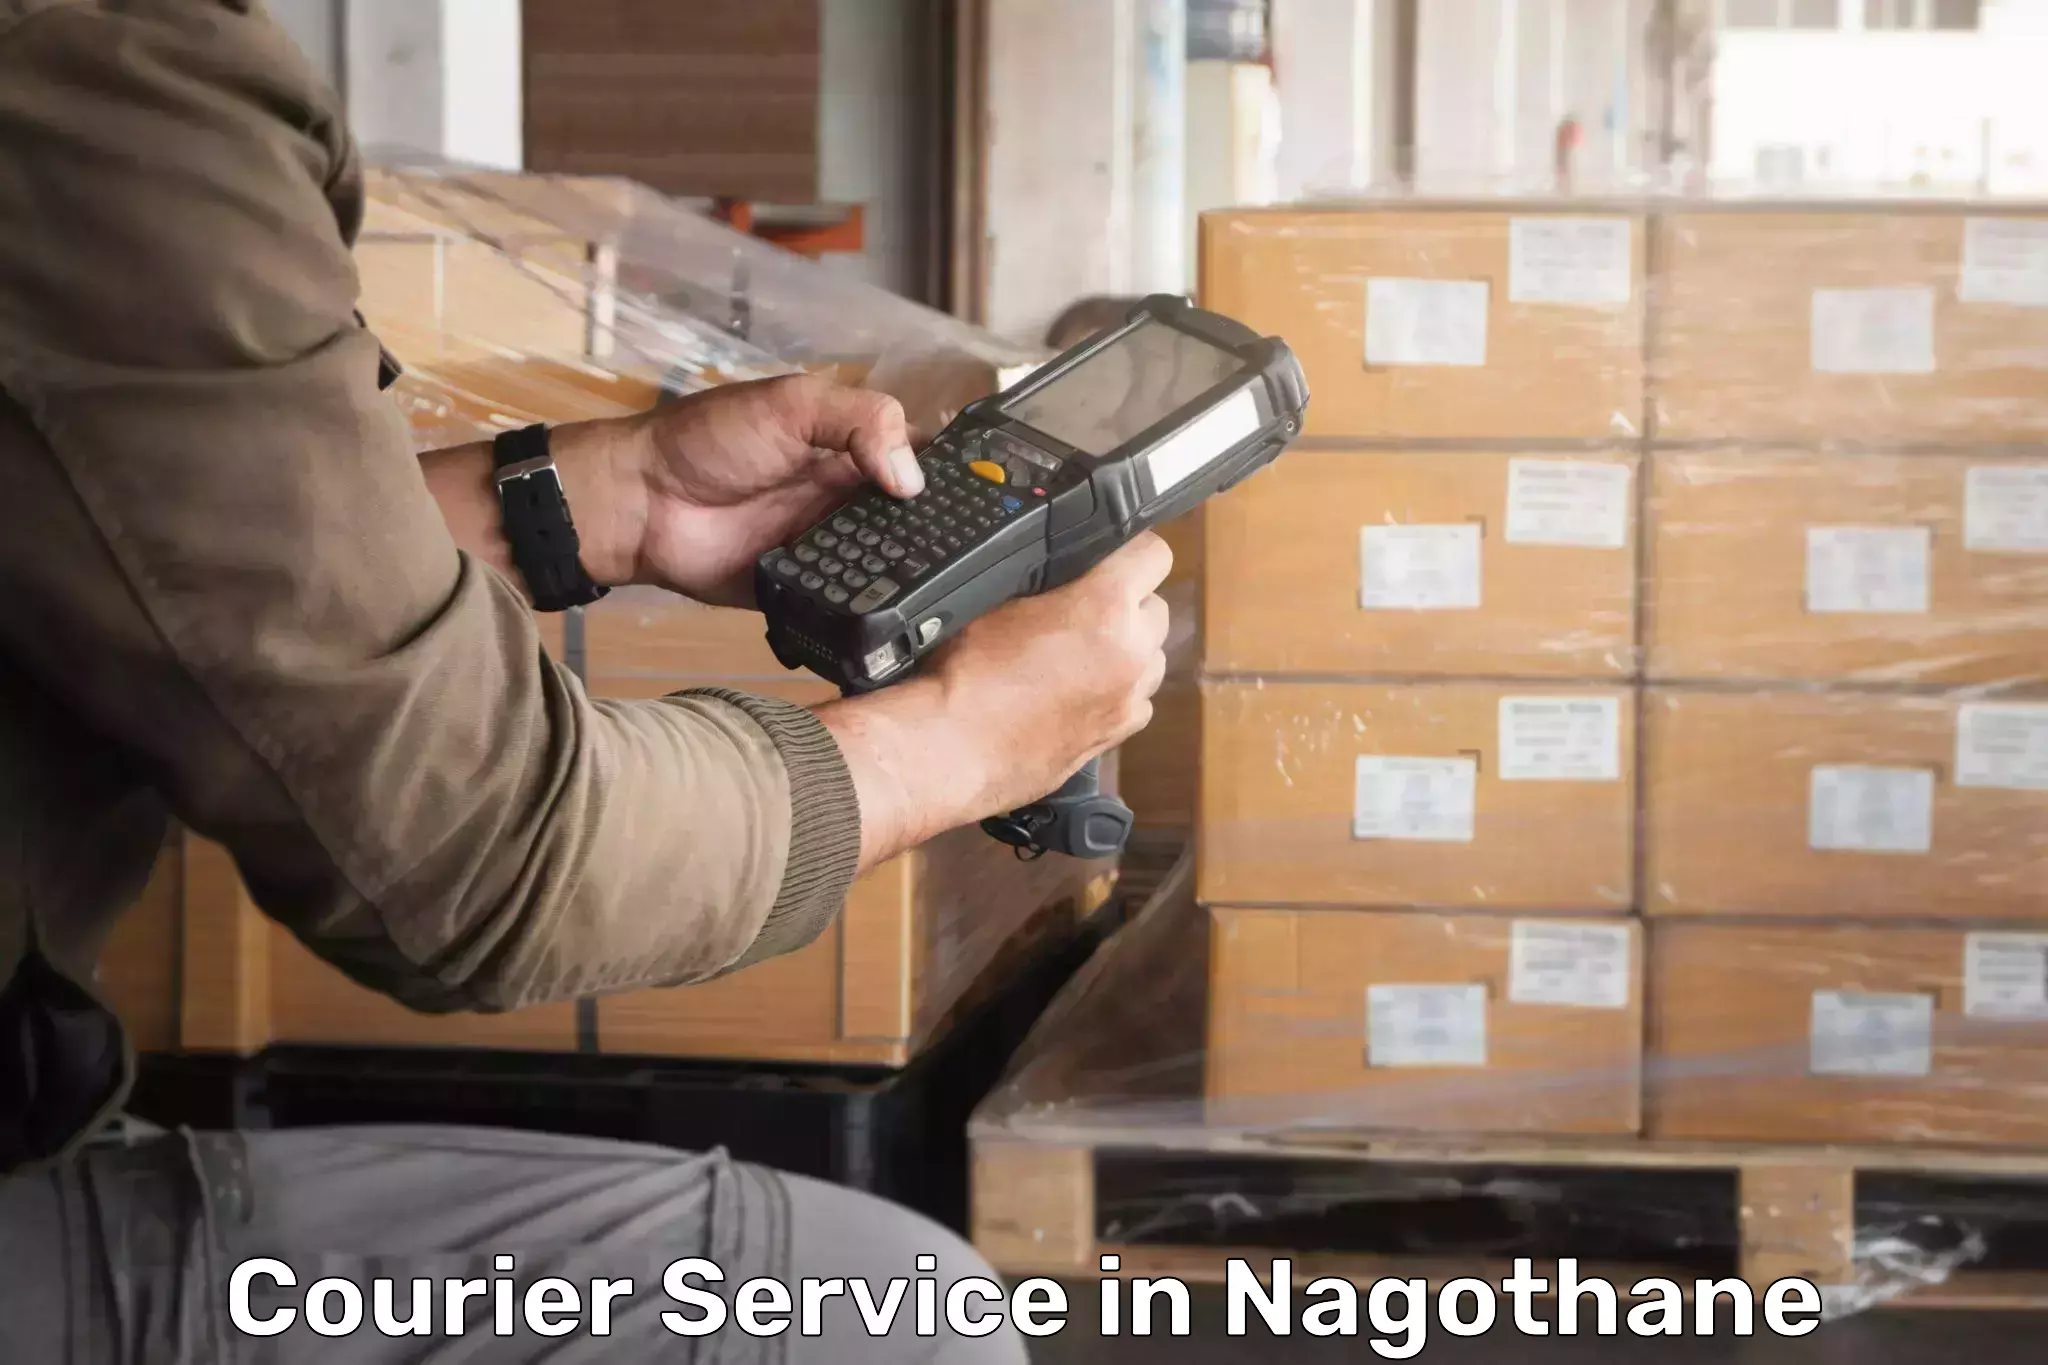 Multi-national courier services in Nagothane